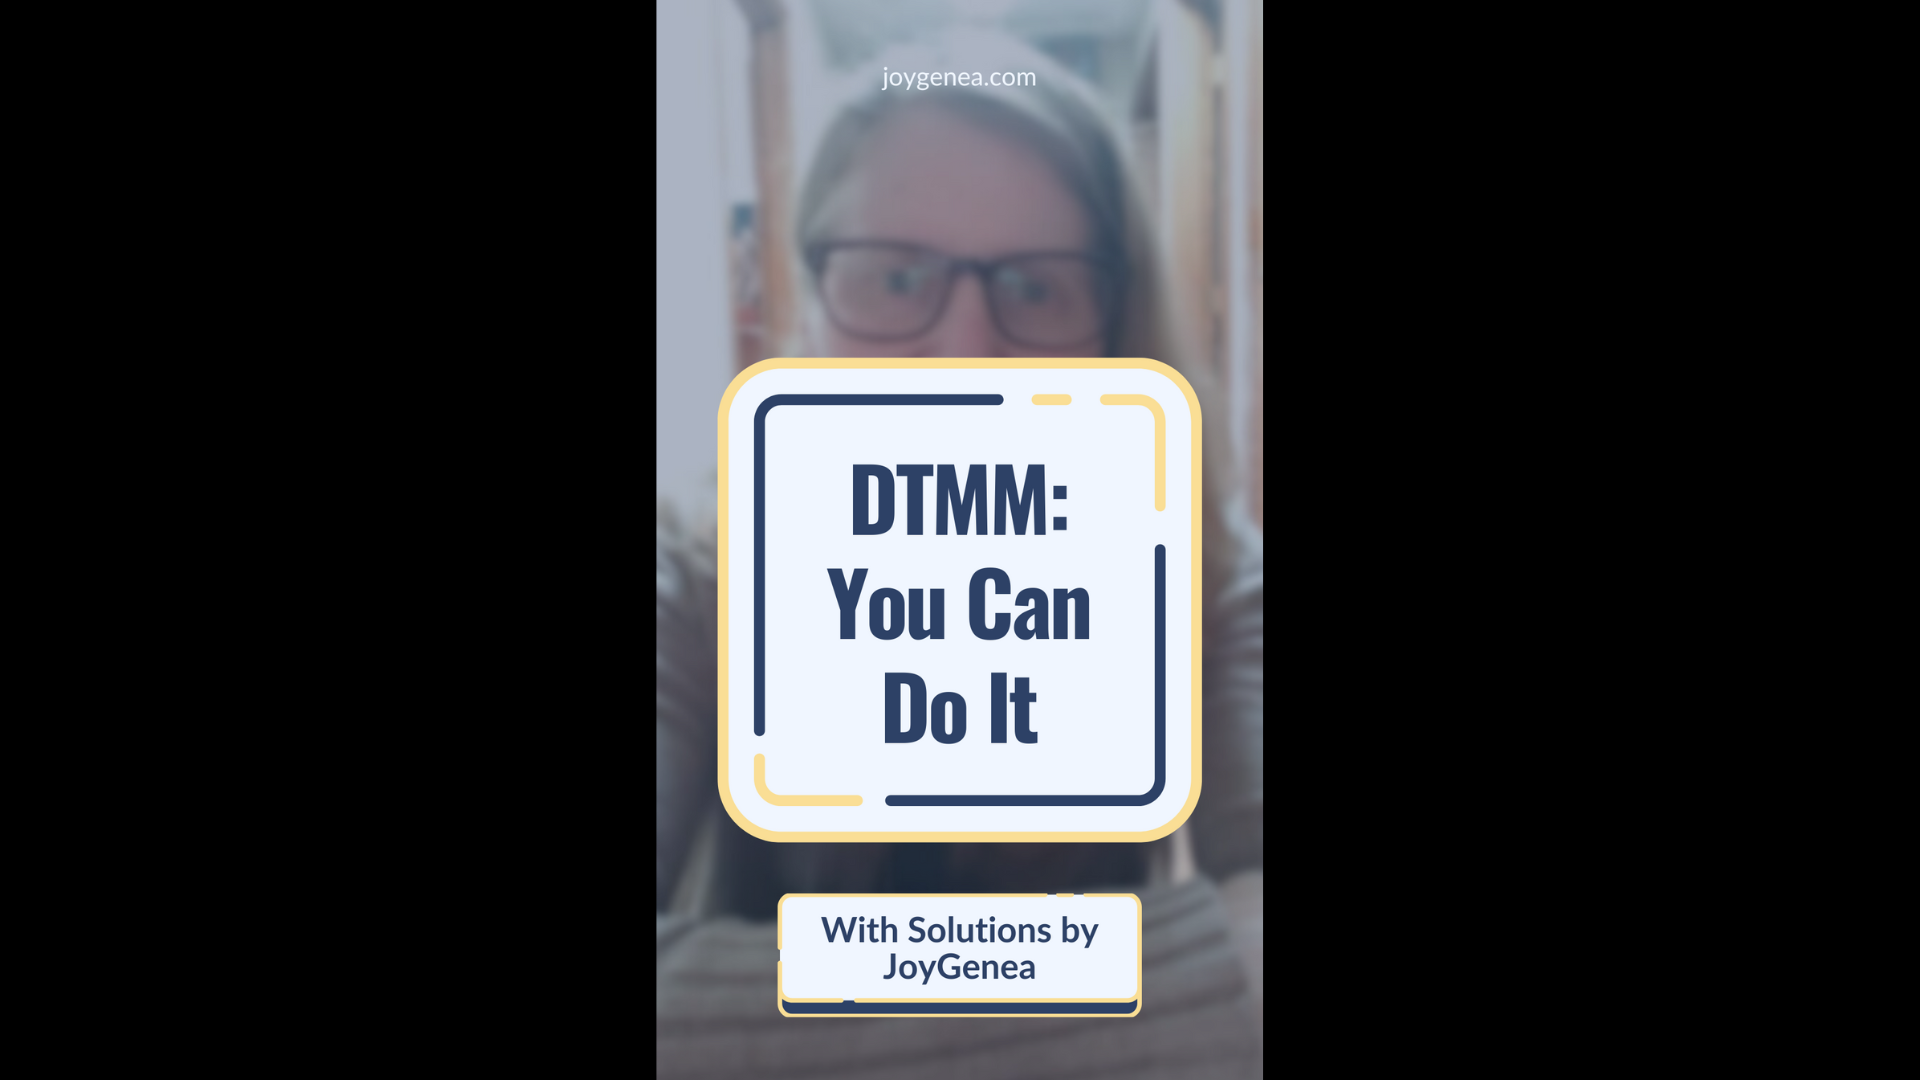 Featured image for “DTMM: You Can Do It”